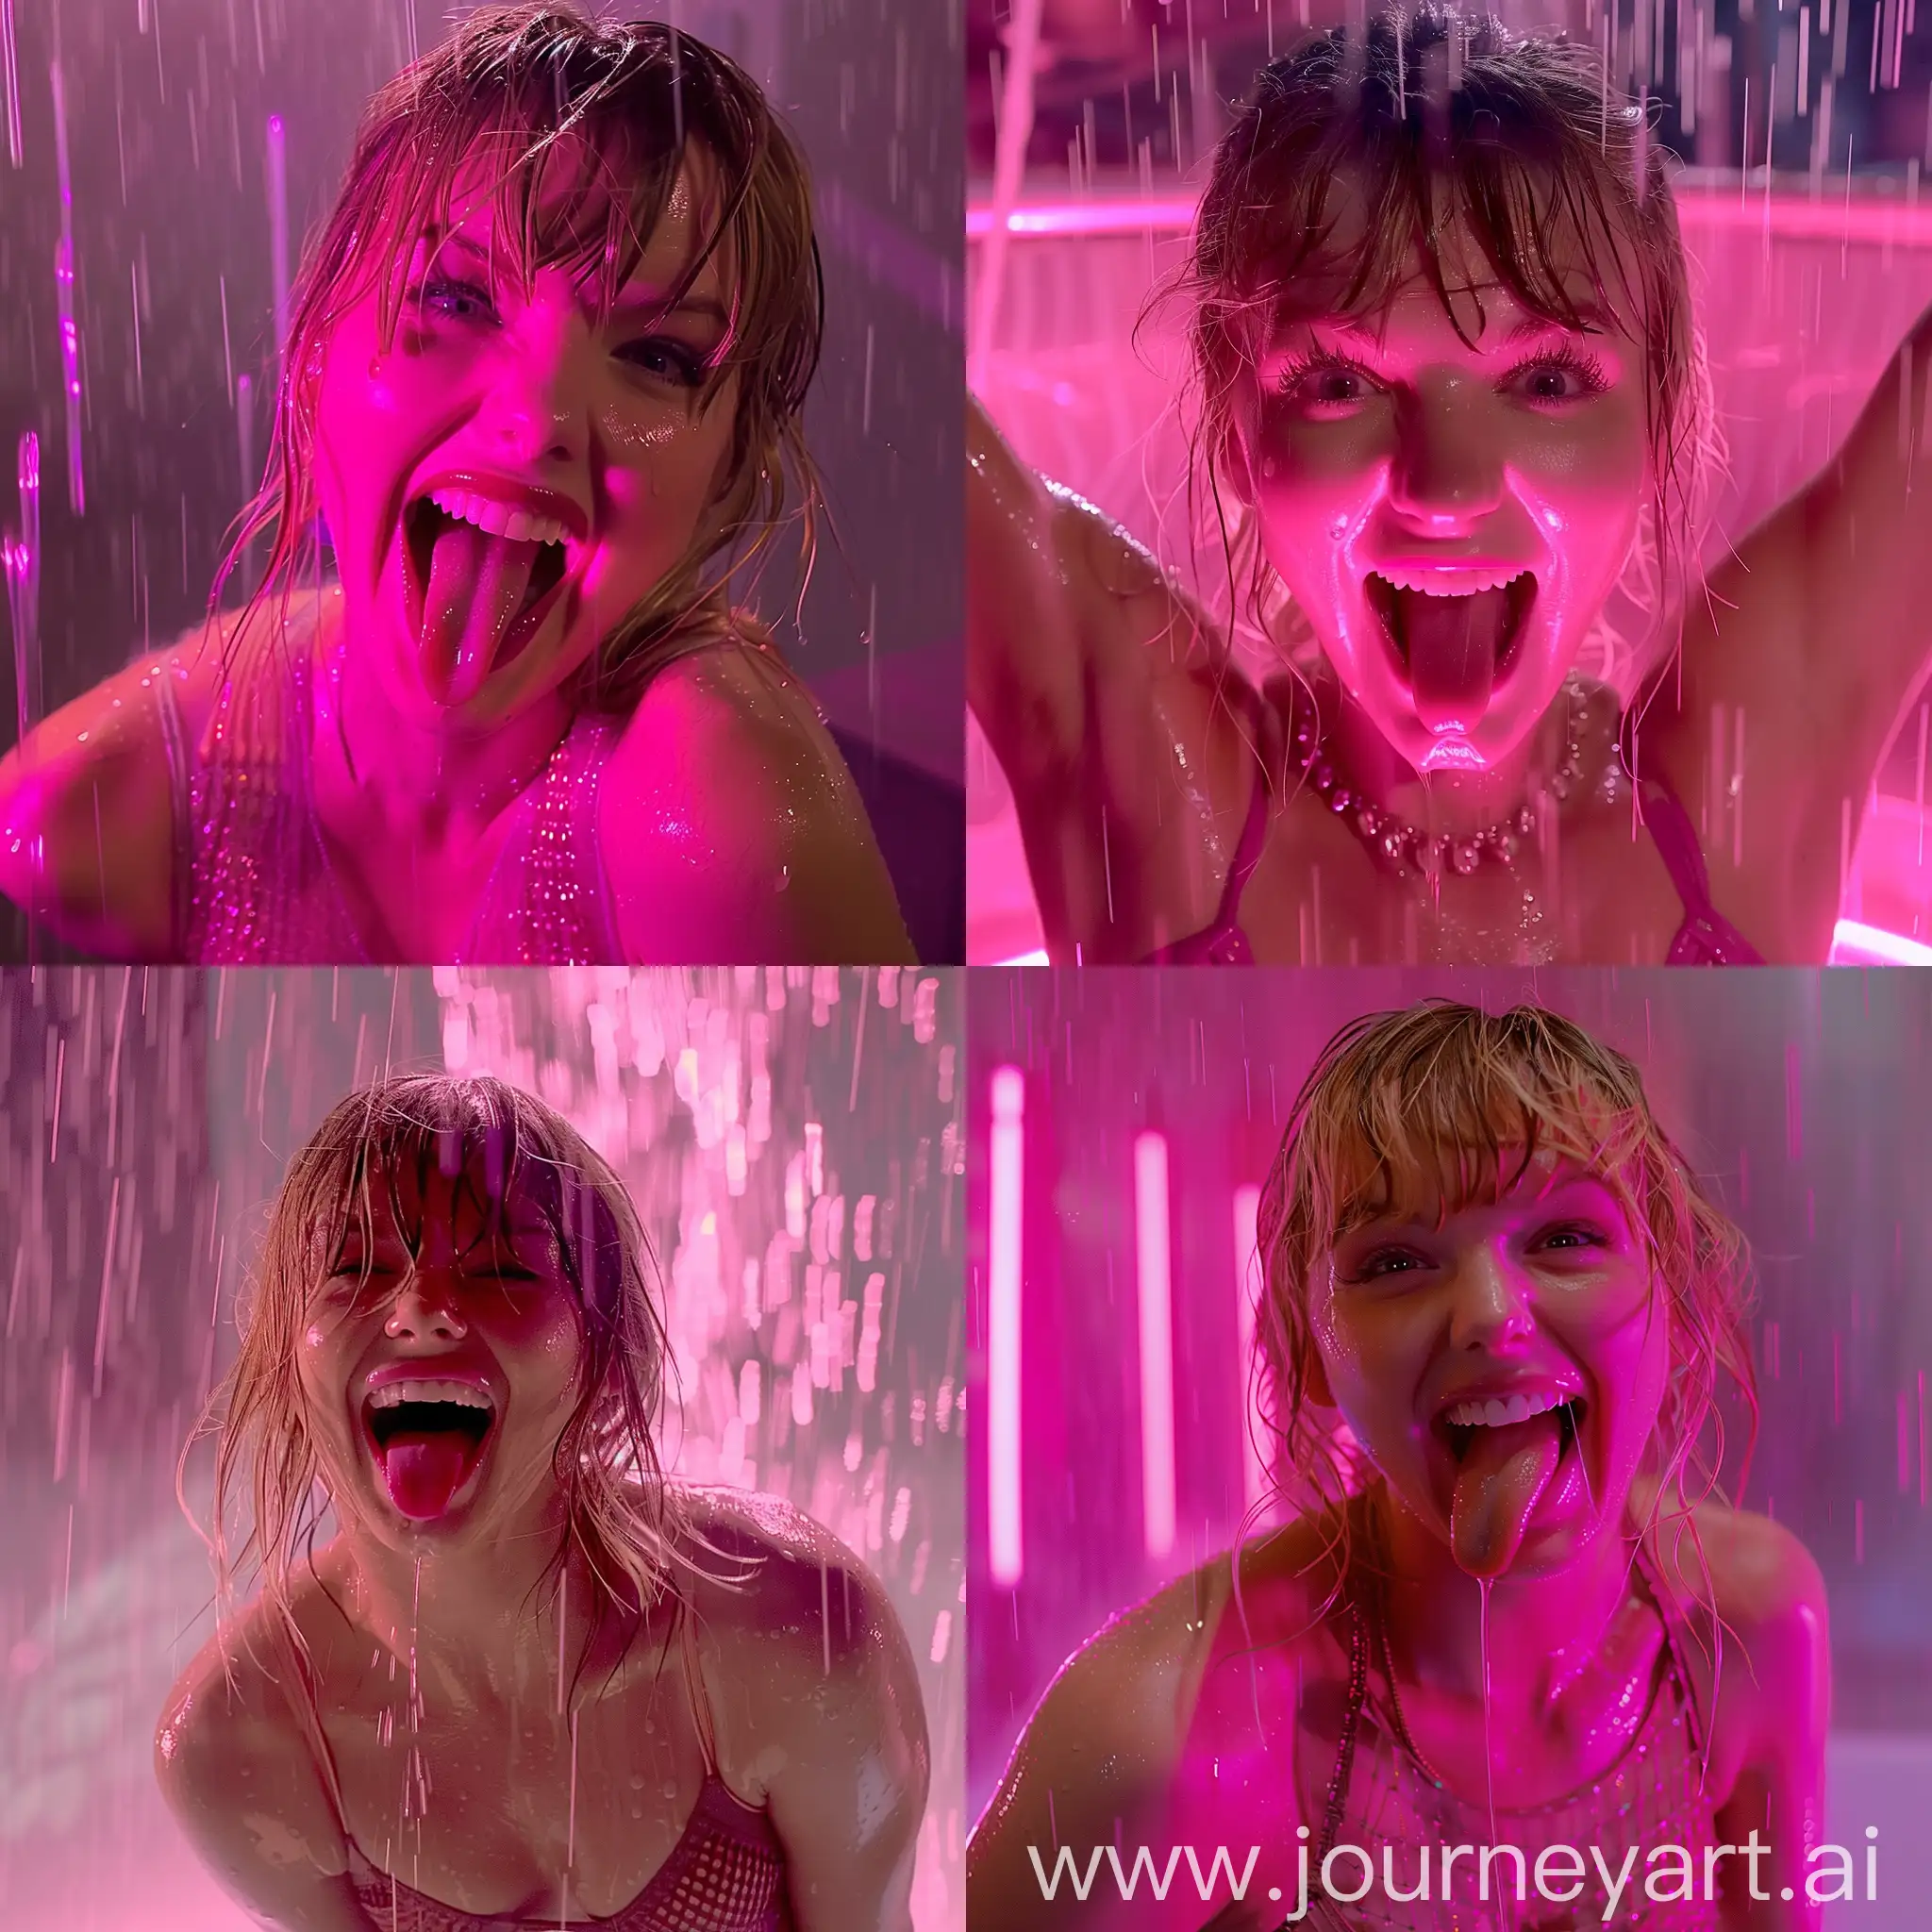 Taylor-Swift-Glows-in-Pink-Light-Rocking-Sheer-Top-and-Flaunting-Fit-Abdomen-on-Rainy-Day